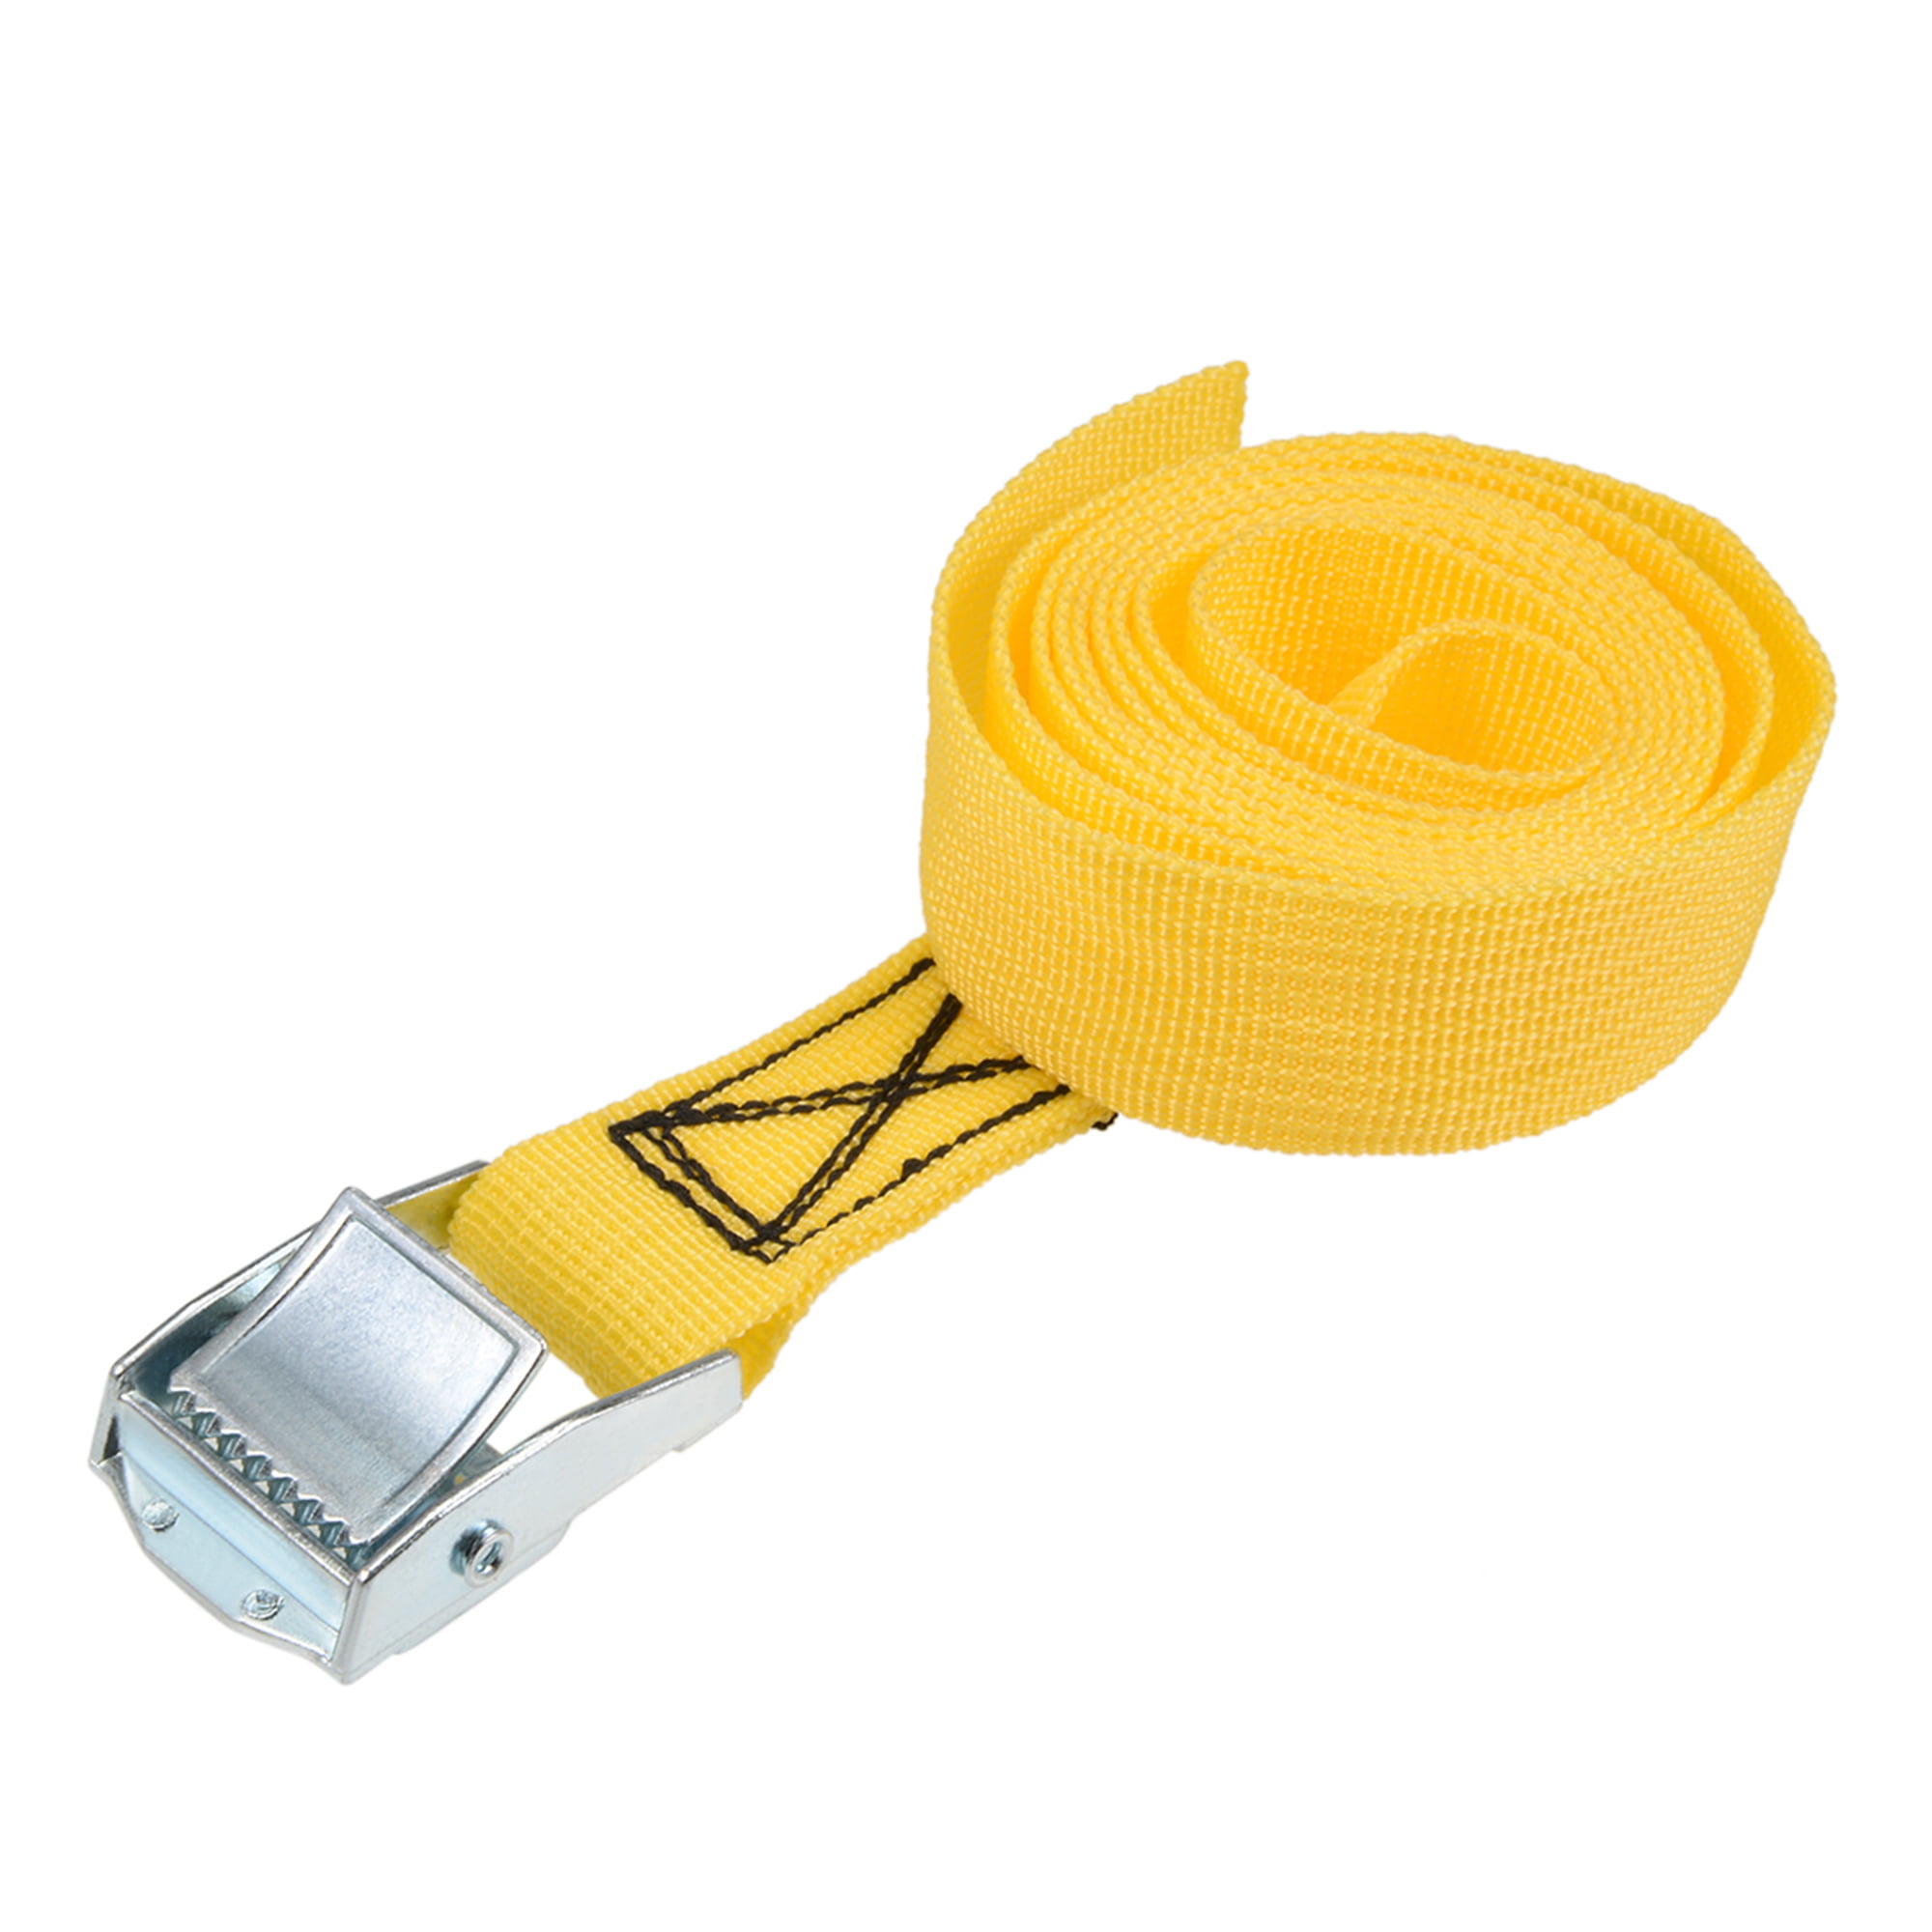 9M x 25mm Tie Down Strap Load tie Down Straps with cam Locking Buckle 250 kg Working Load Yellow